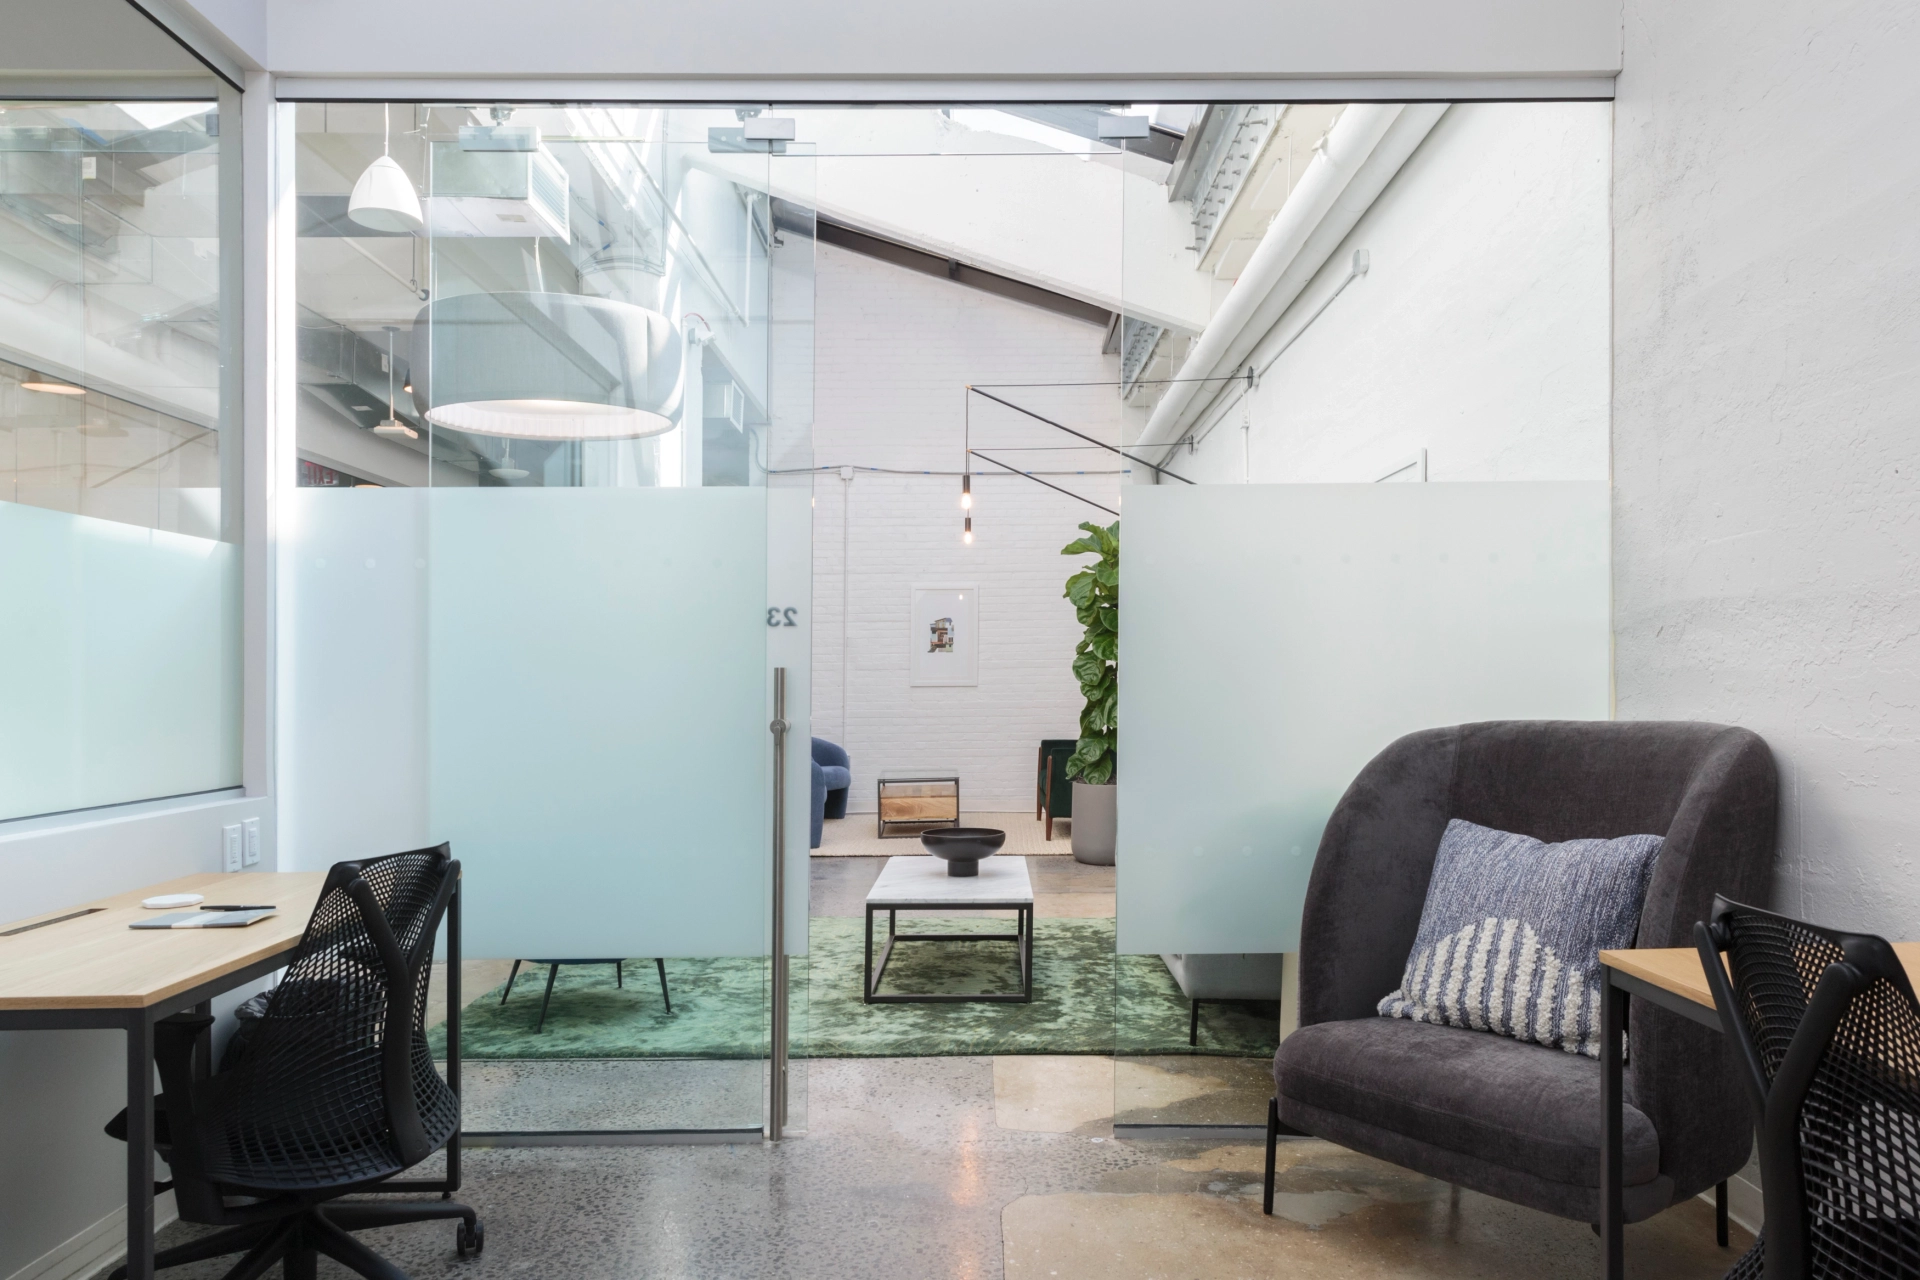 A modern workspace in Brooklyn featuring a glass wall and comfortable chairs.